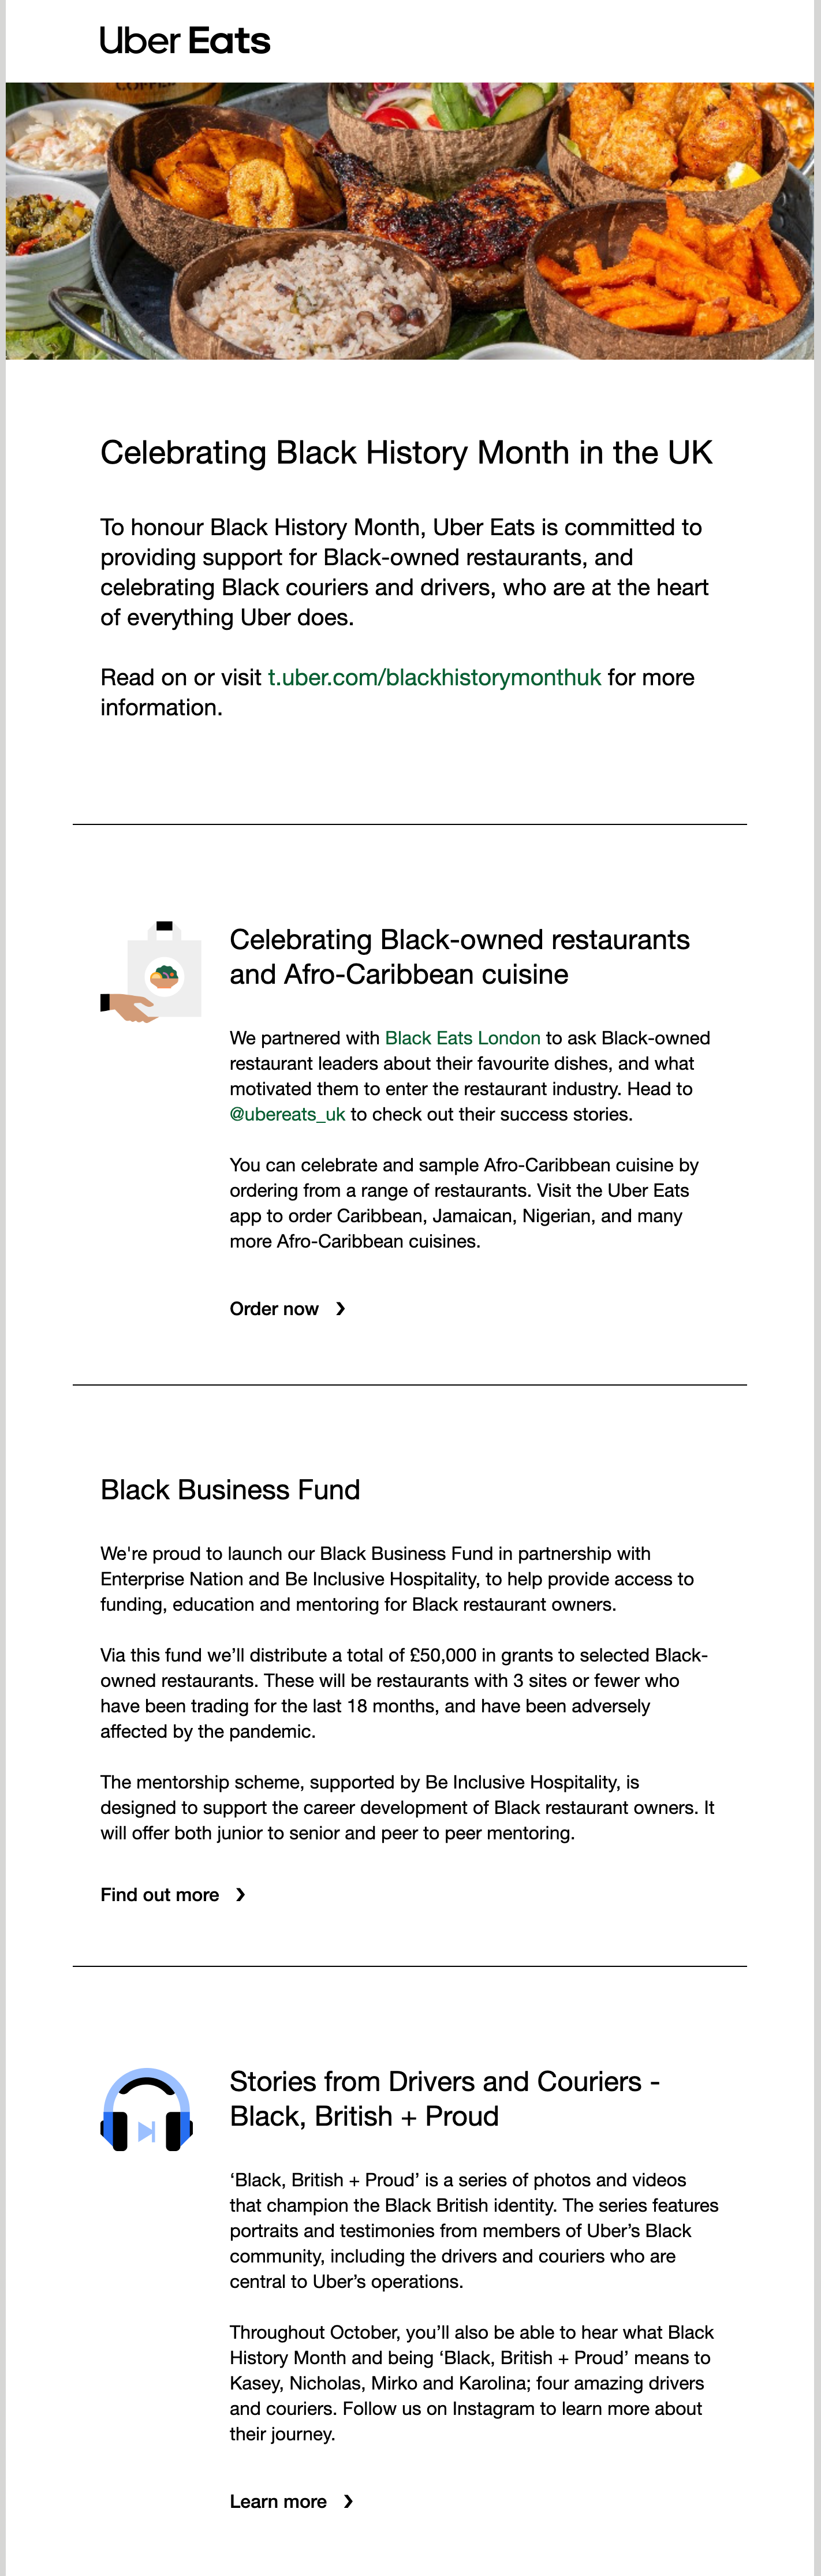 Black History Month newsletter example from Uber Eats